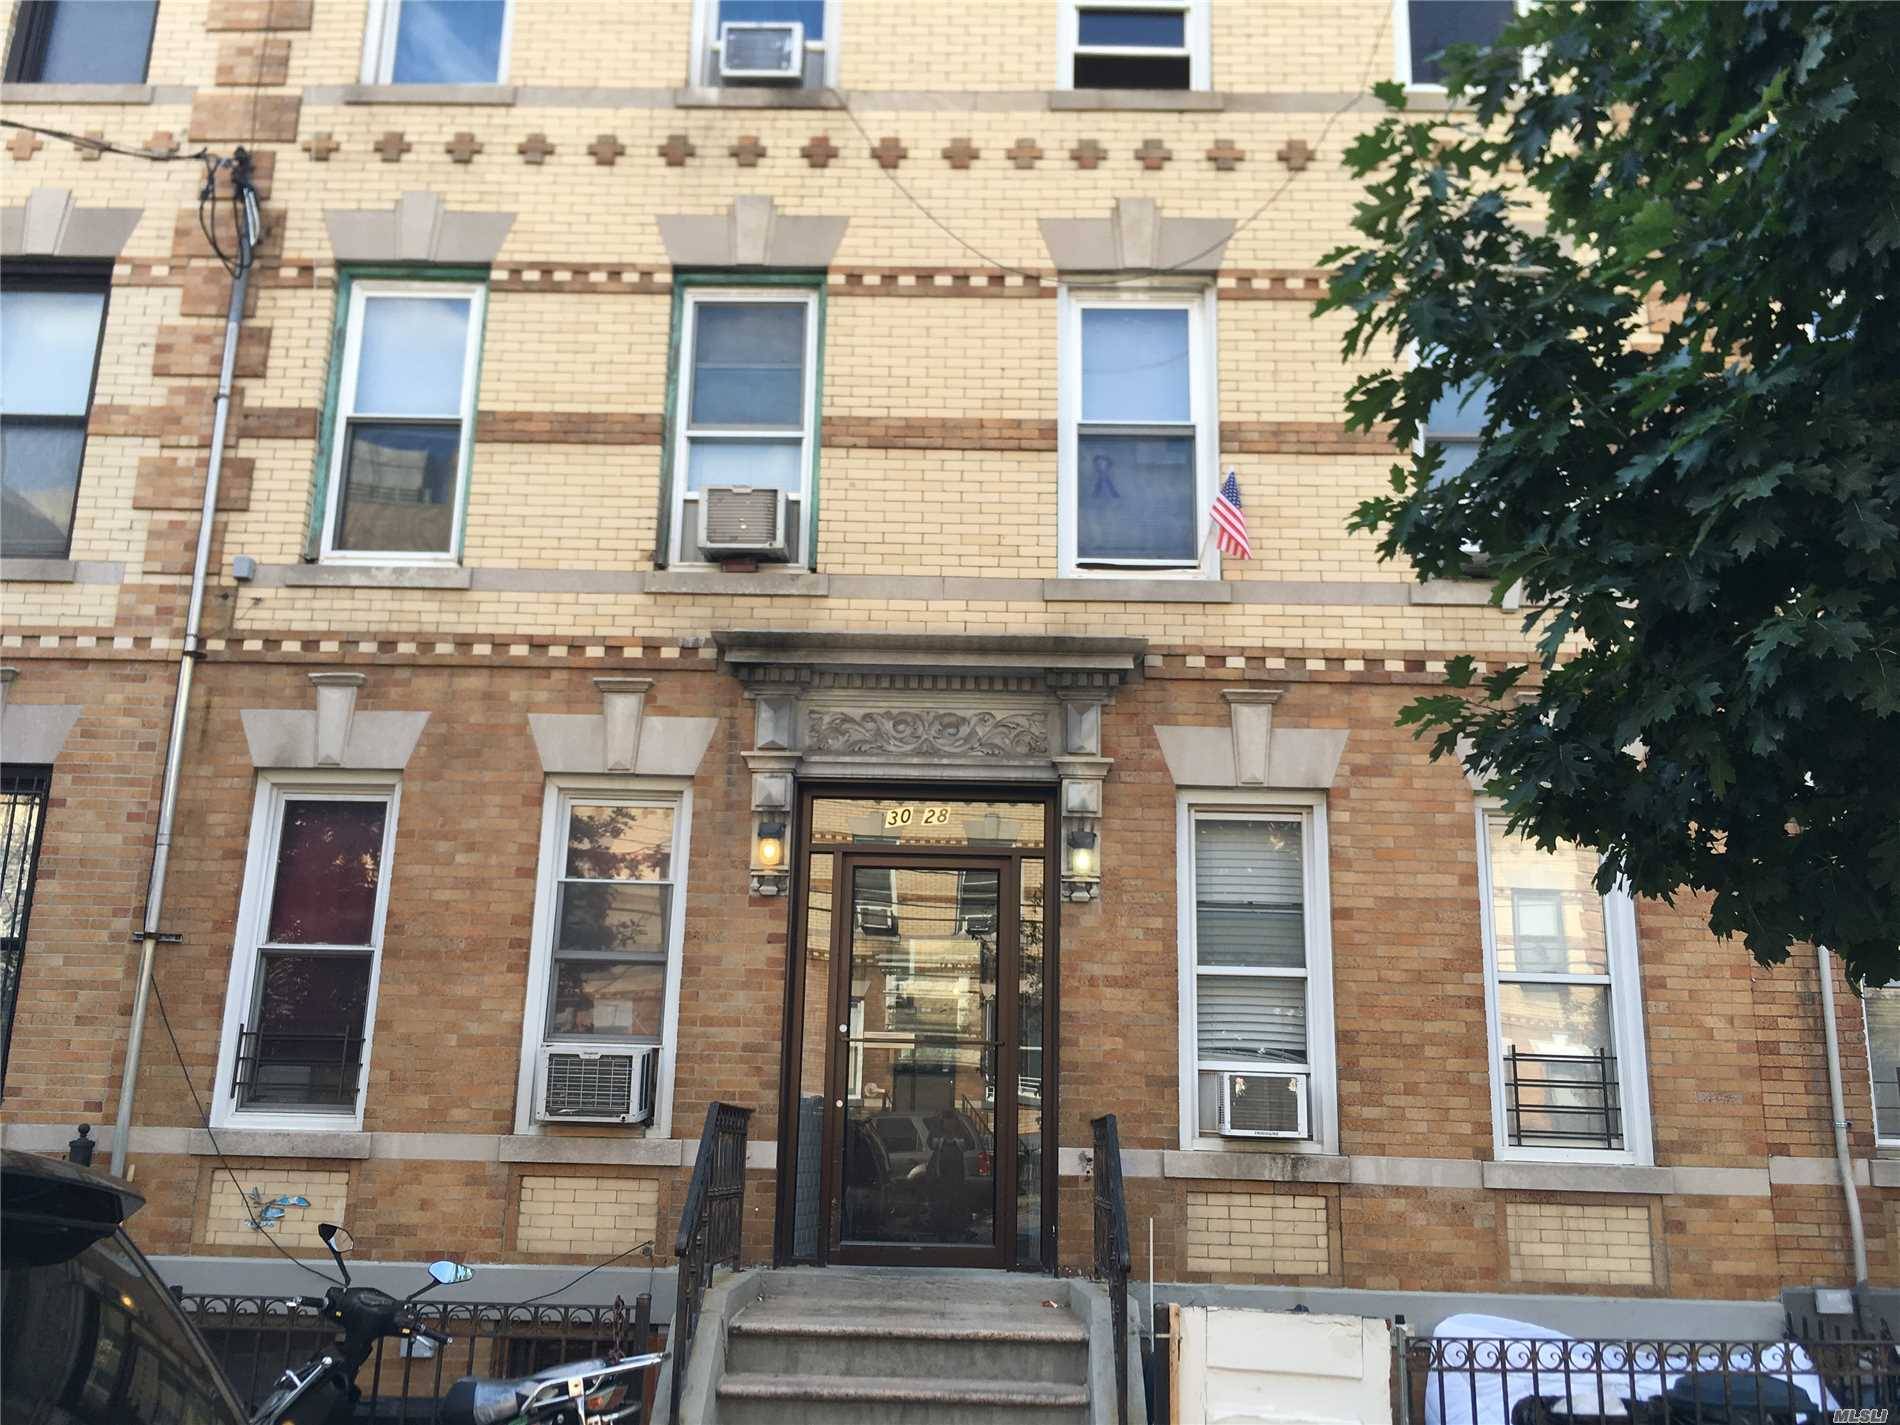 Family Brick Property, Ll 6 Units Are Rent Stabilized.